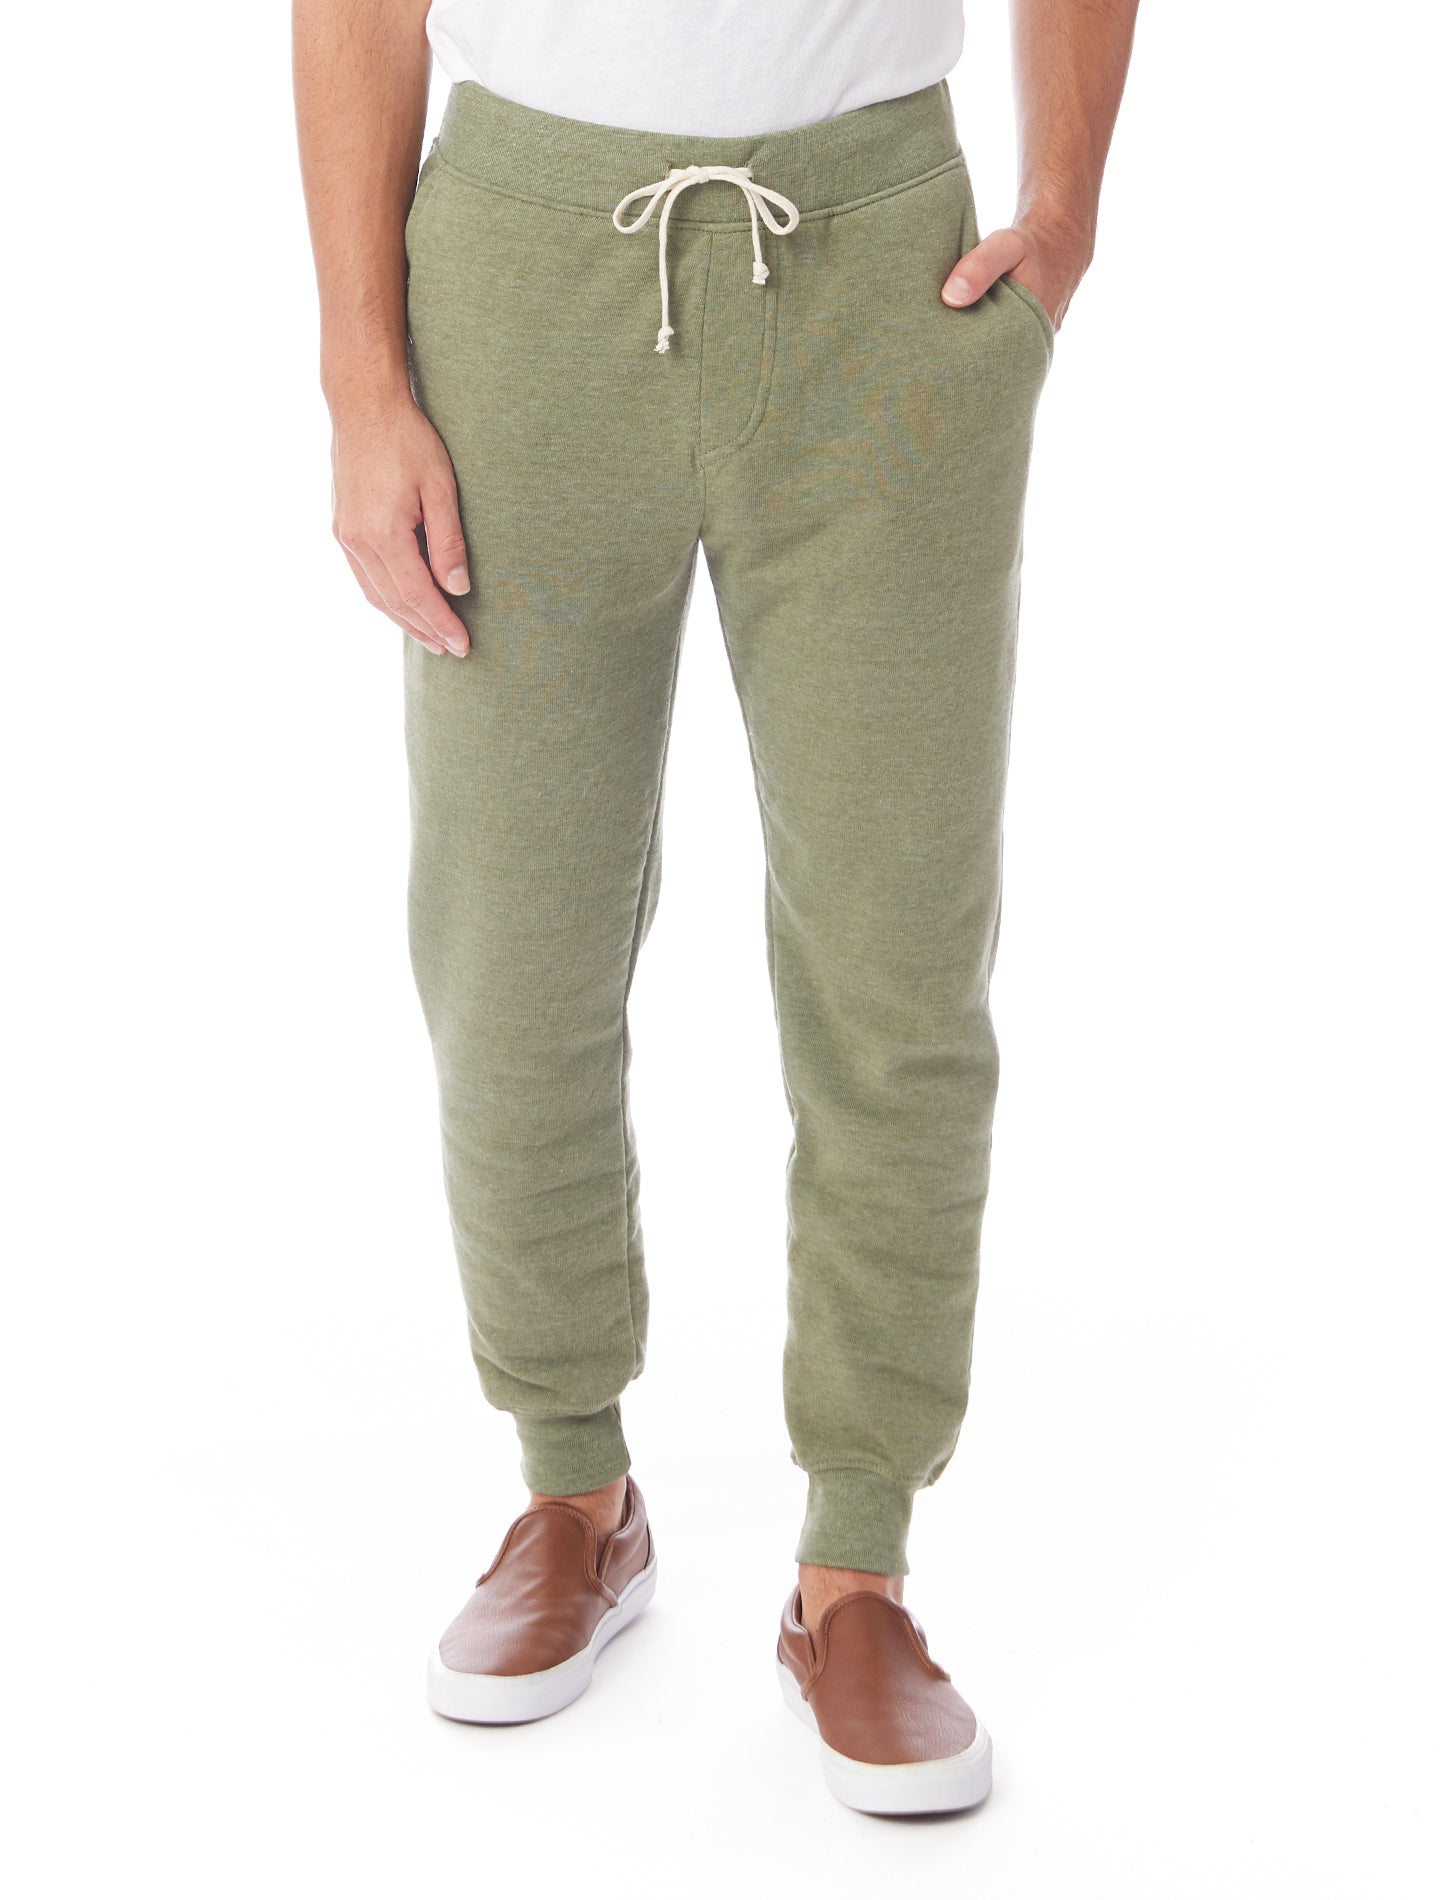 The Homestead Expression Joggers